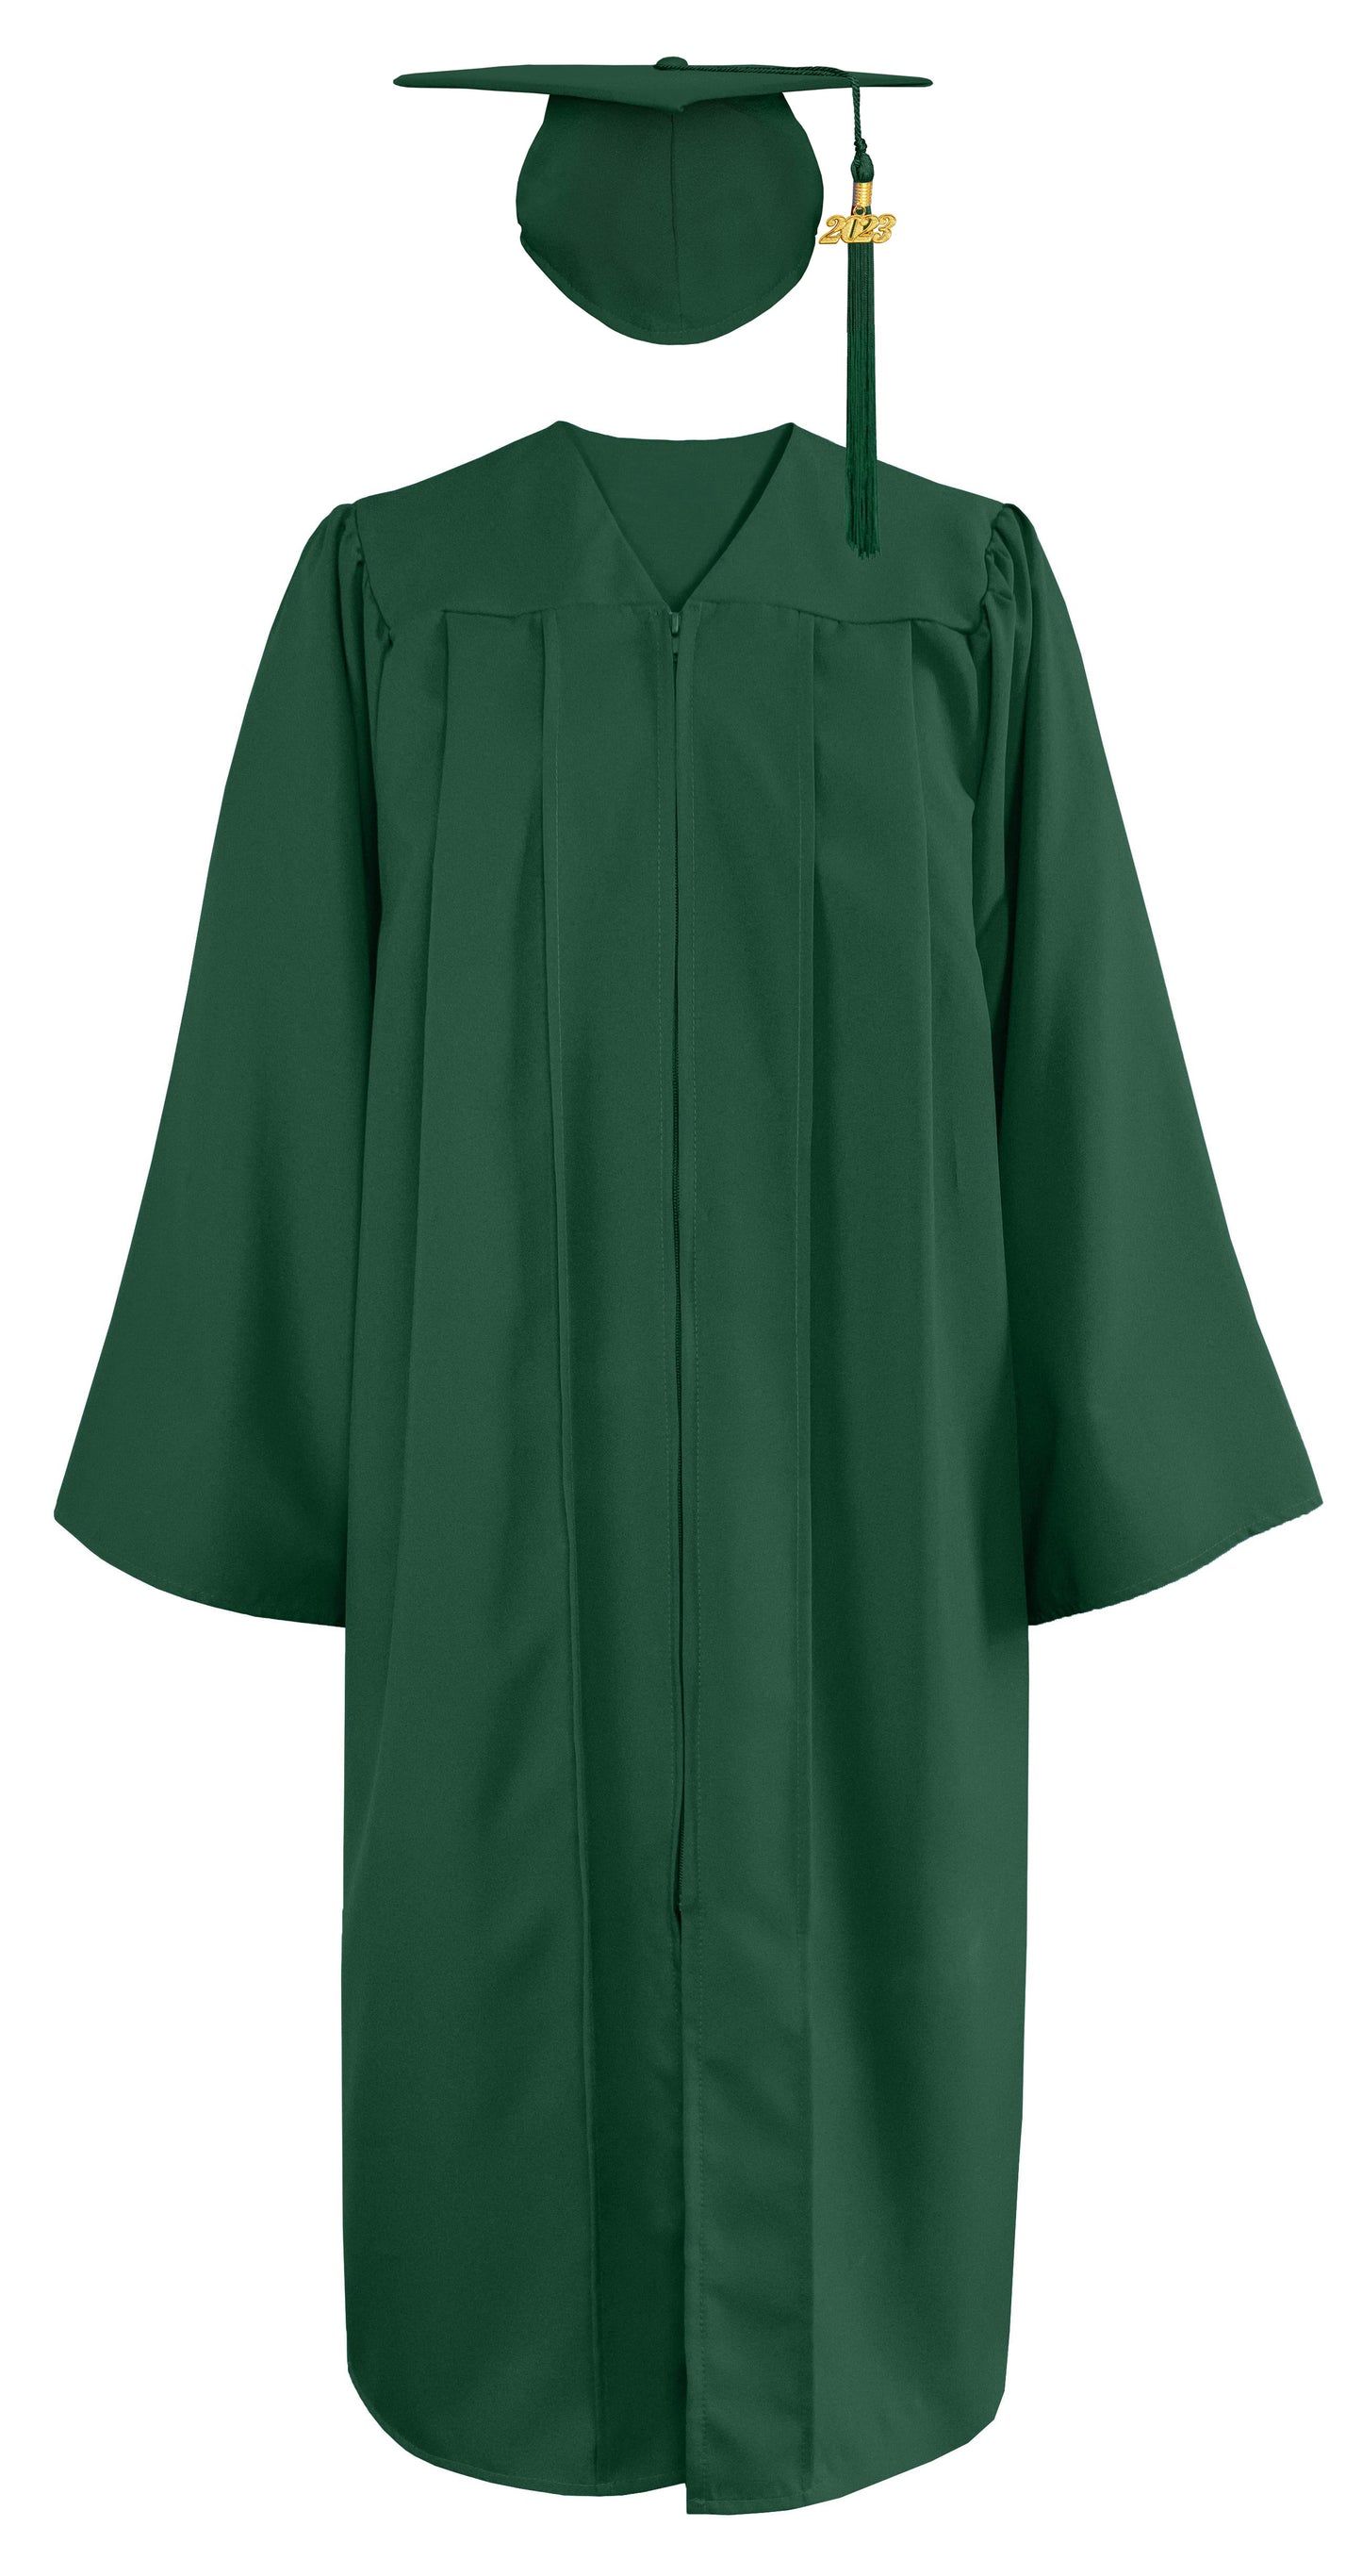 Matte Graduation Gown & Cap with Tassel Charm 2023|2024 for Middle & High School | Bachelor Degree-CA graduation